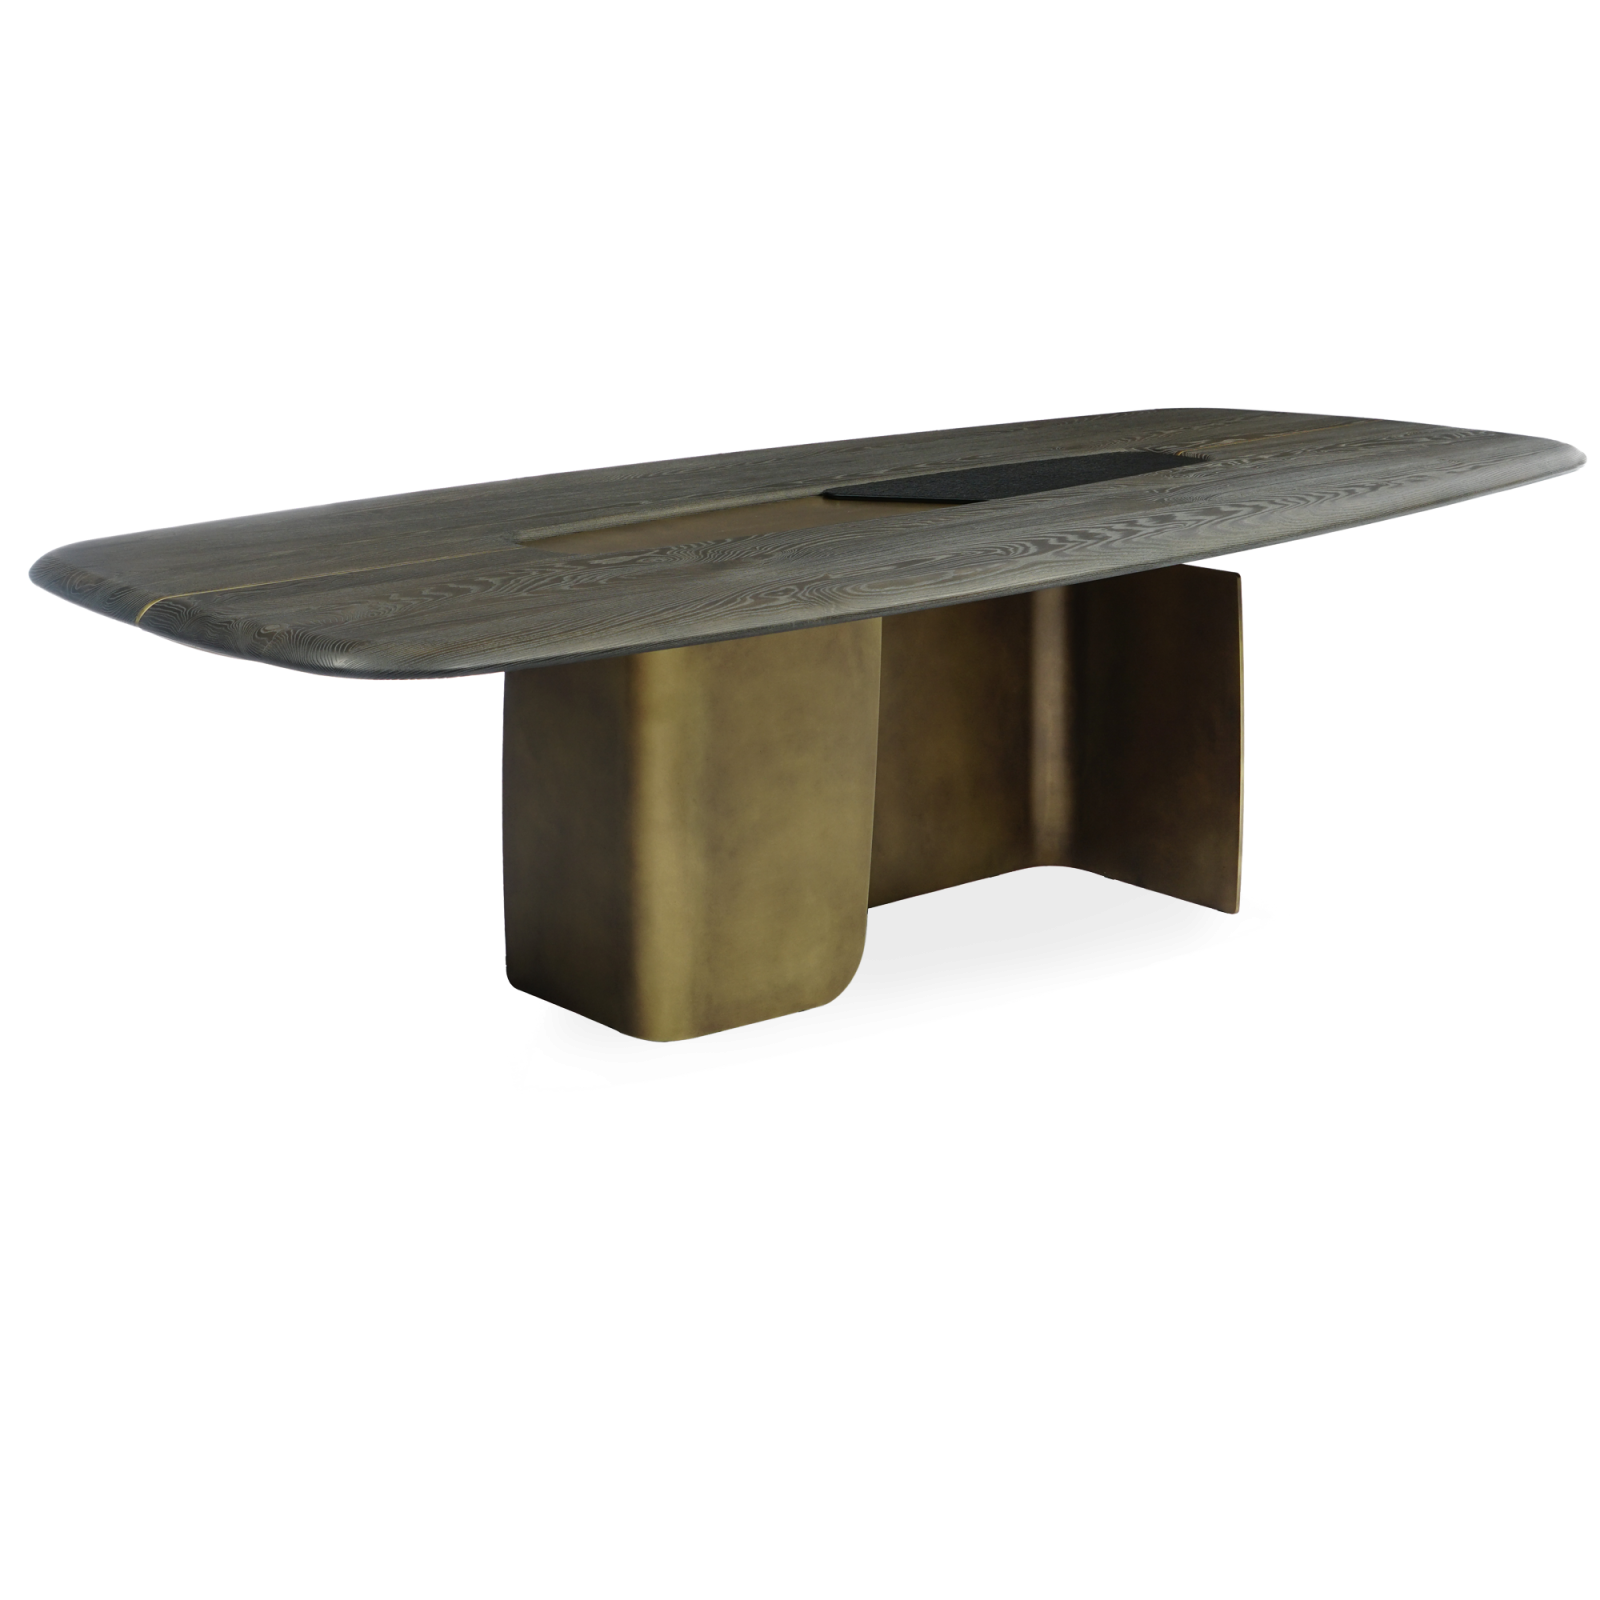 Menhir Table is Formed by a combination of dark solid ashwood and fusion glass standing on white background.